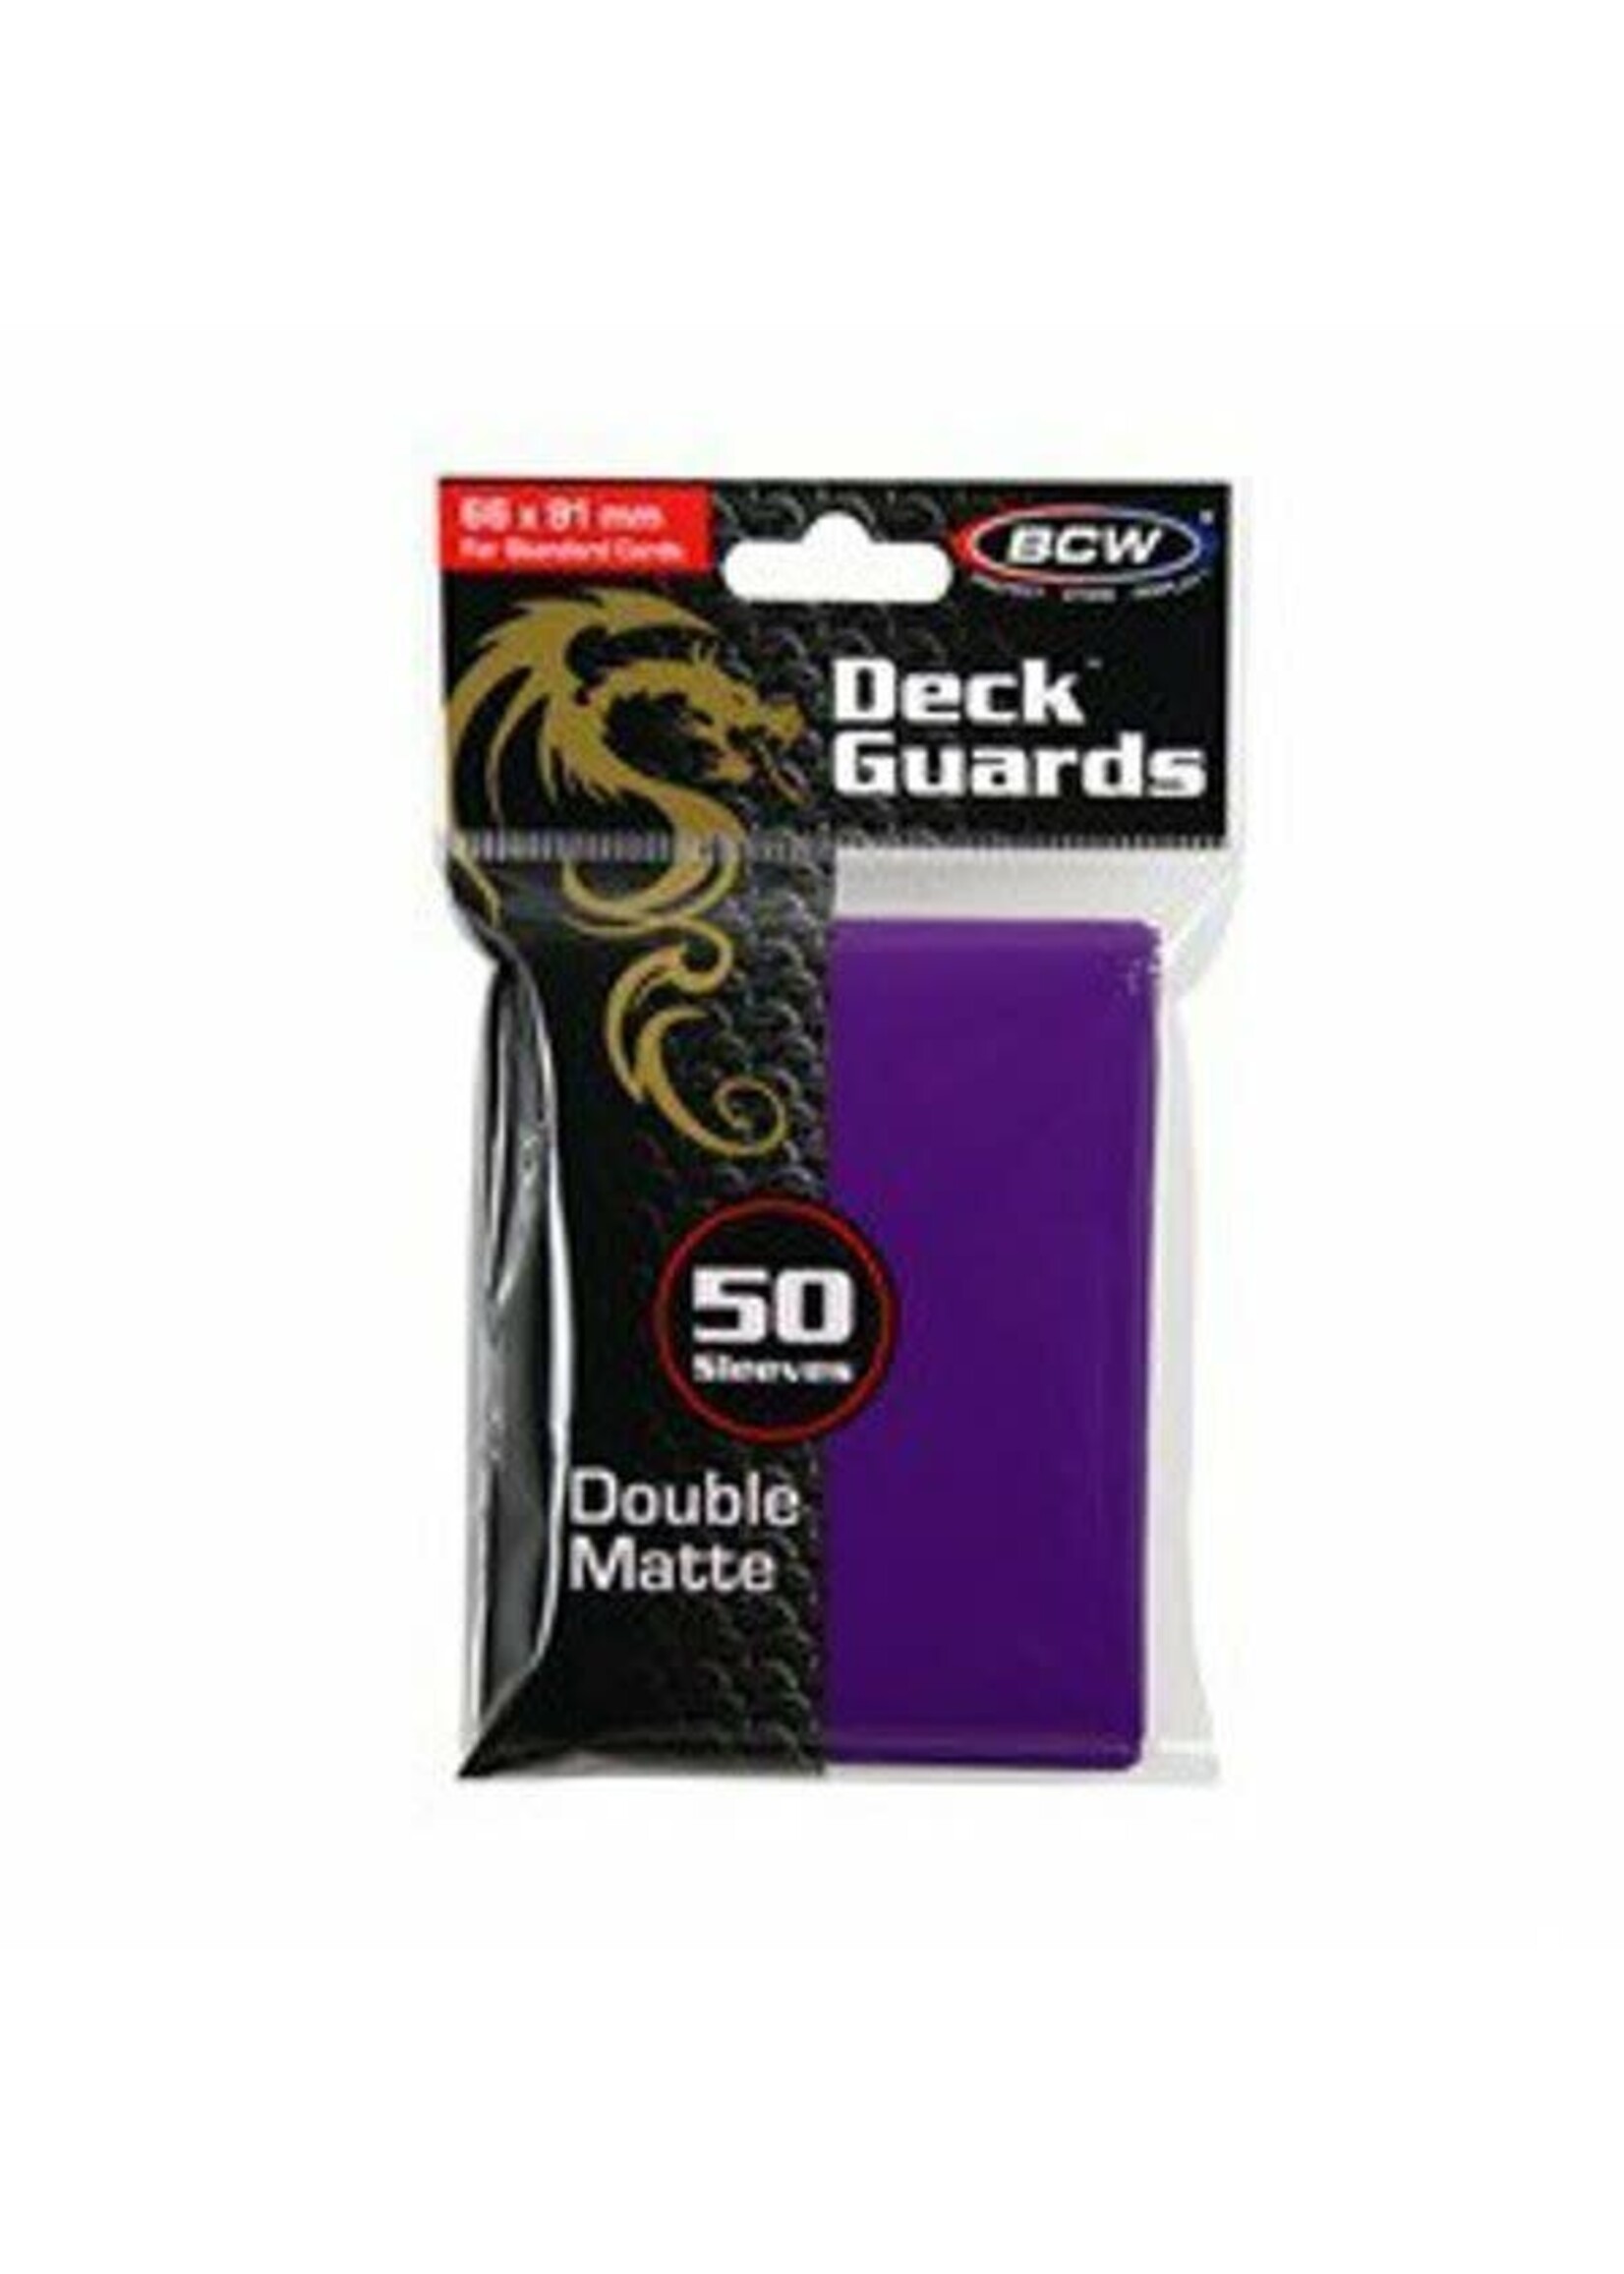 BCW BCW 50 CARD DECK GUARD SLEEVES PURPLE